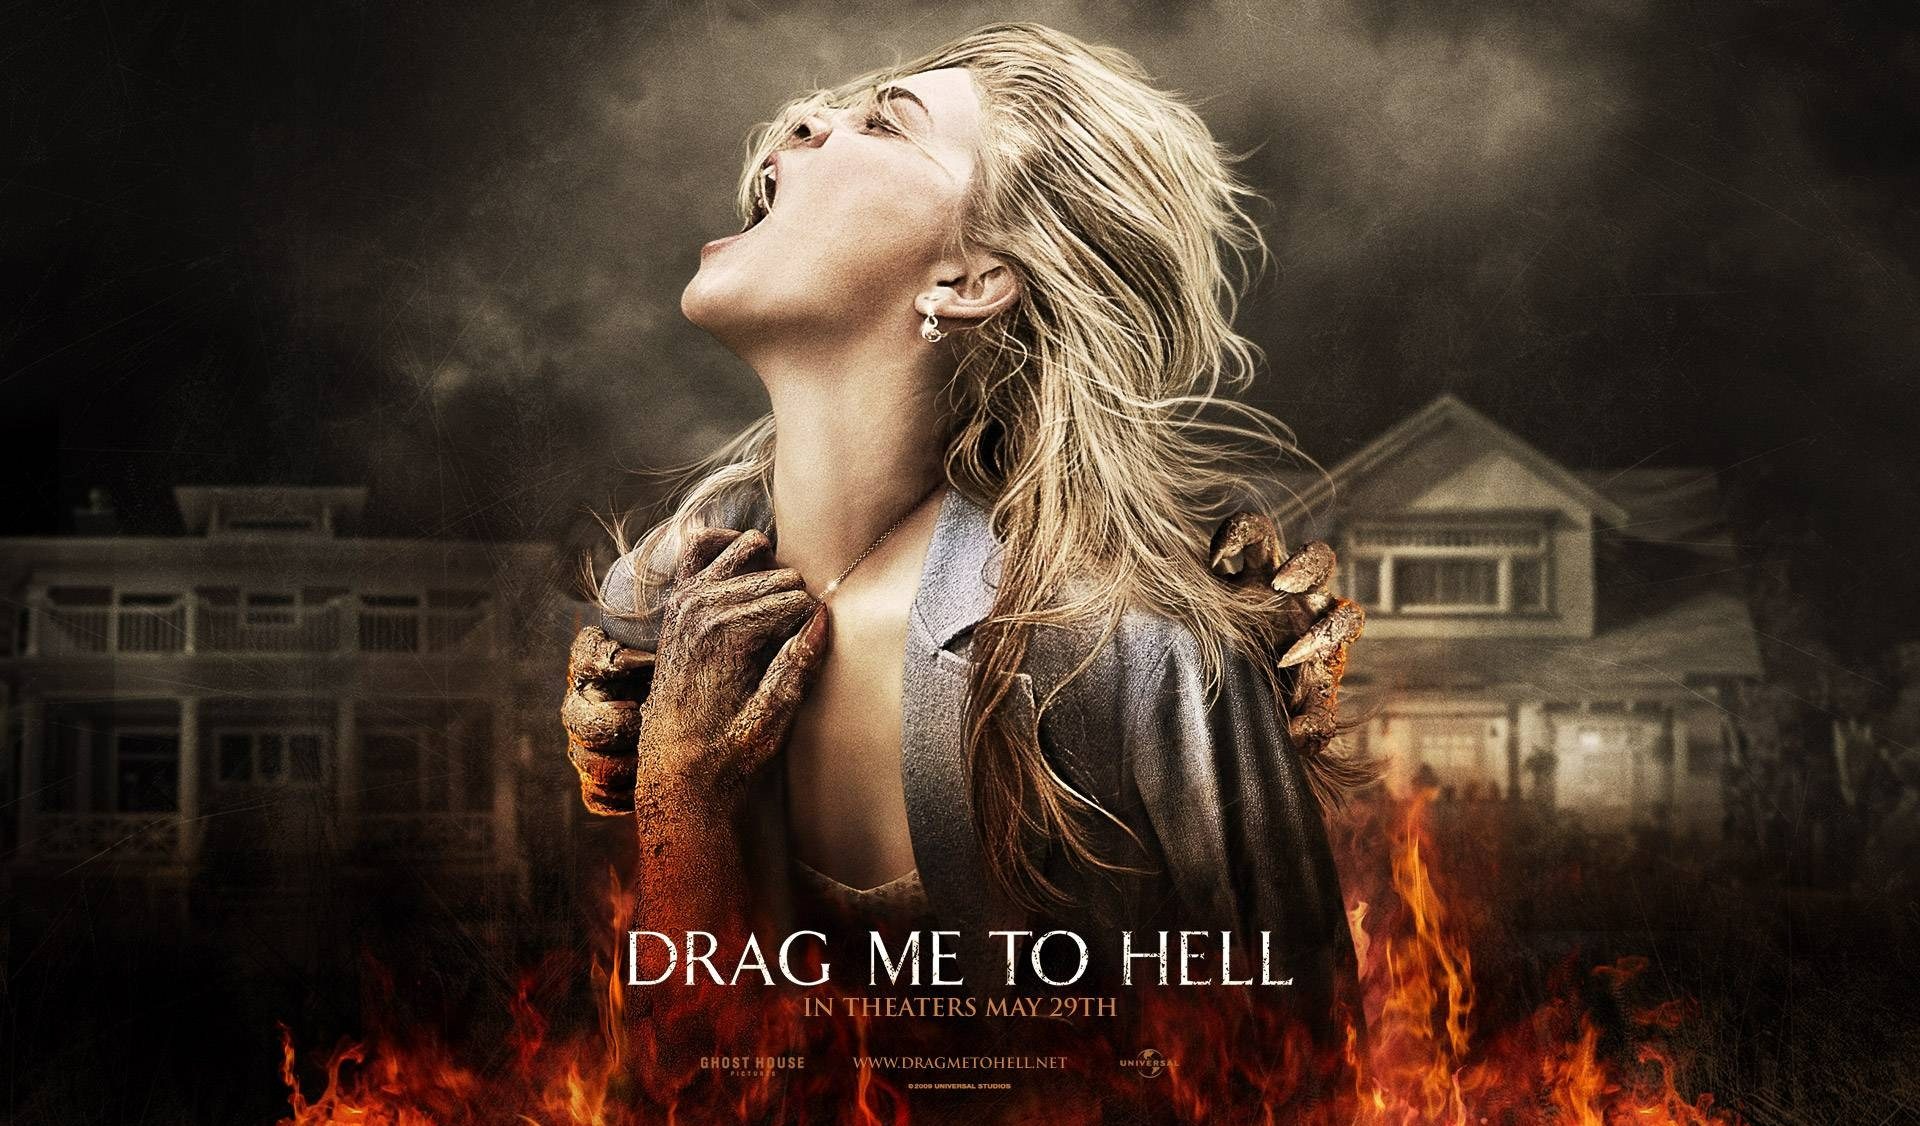 Drag Me to Hell (2009) Google Drive Download